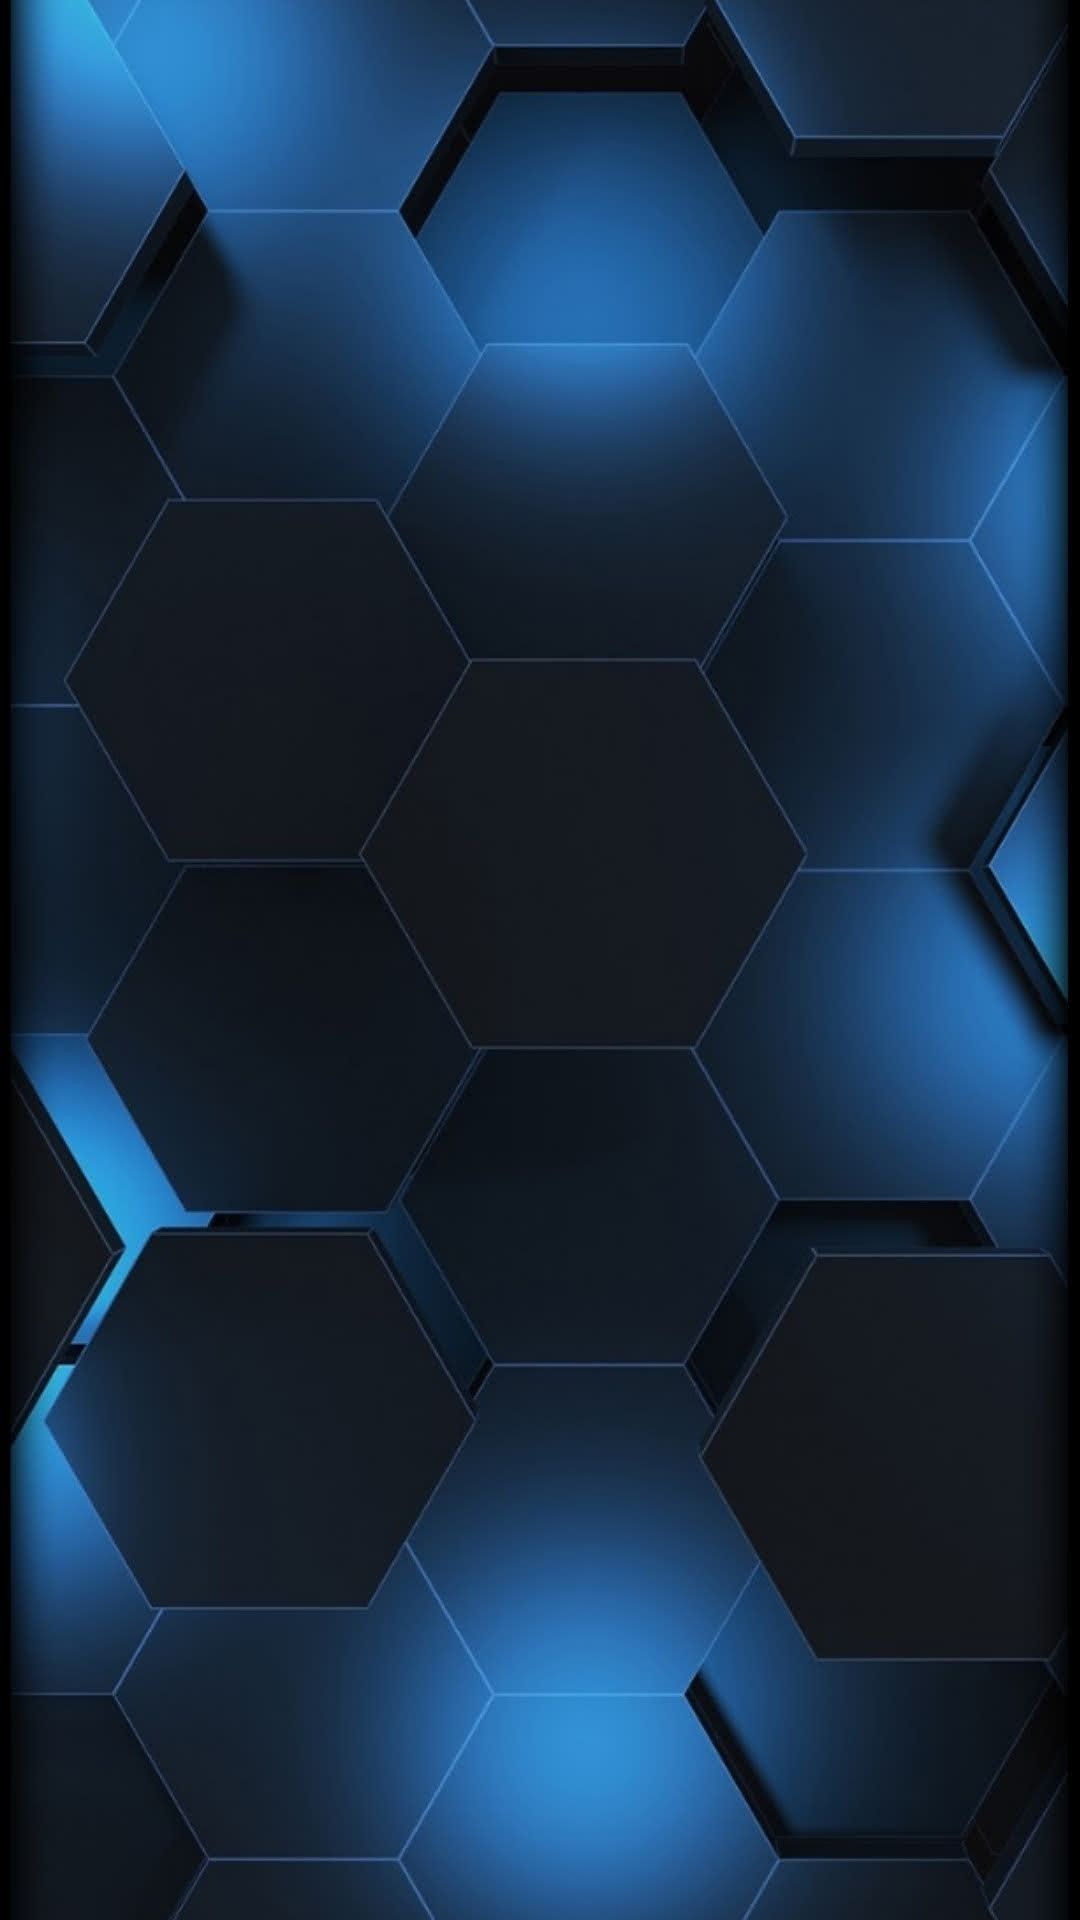 Honeycomb, Blue wallpapers, Geometric pattern, Abstract backgrounds, 1080x1920 Full HD Handy